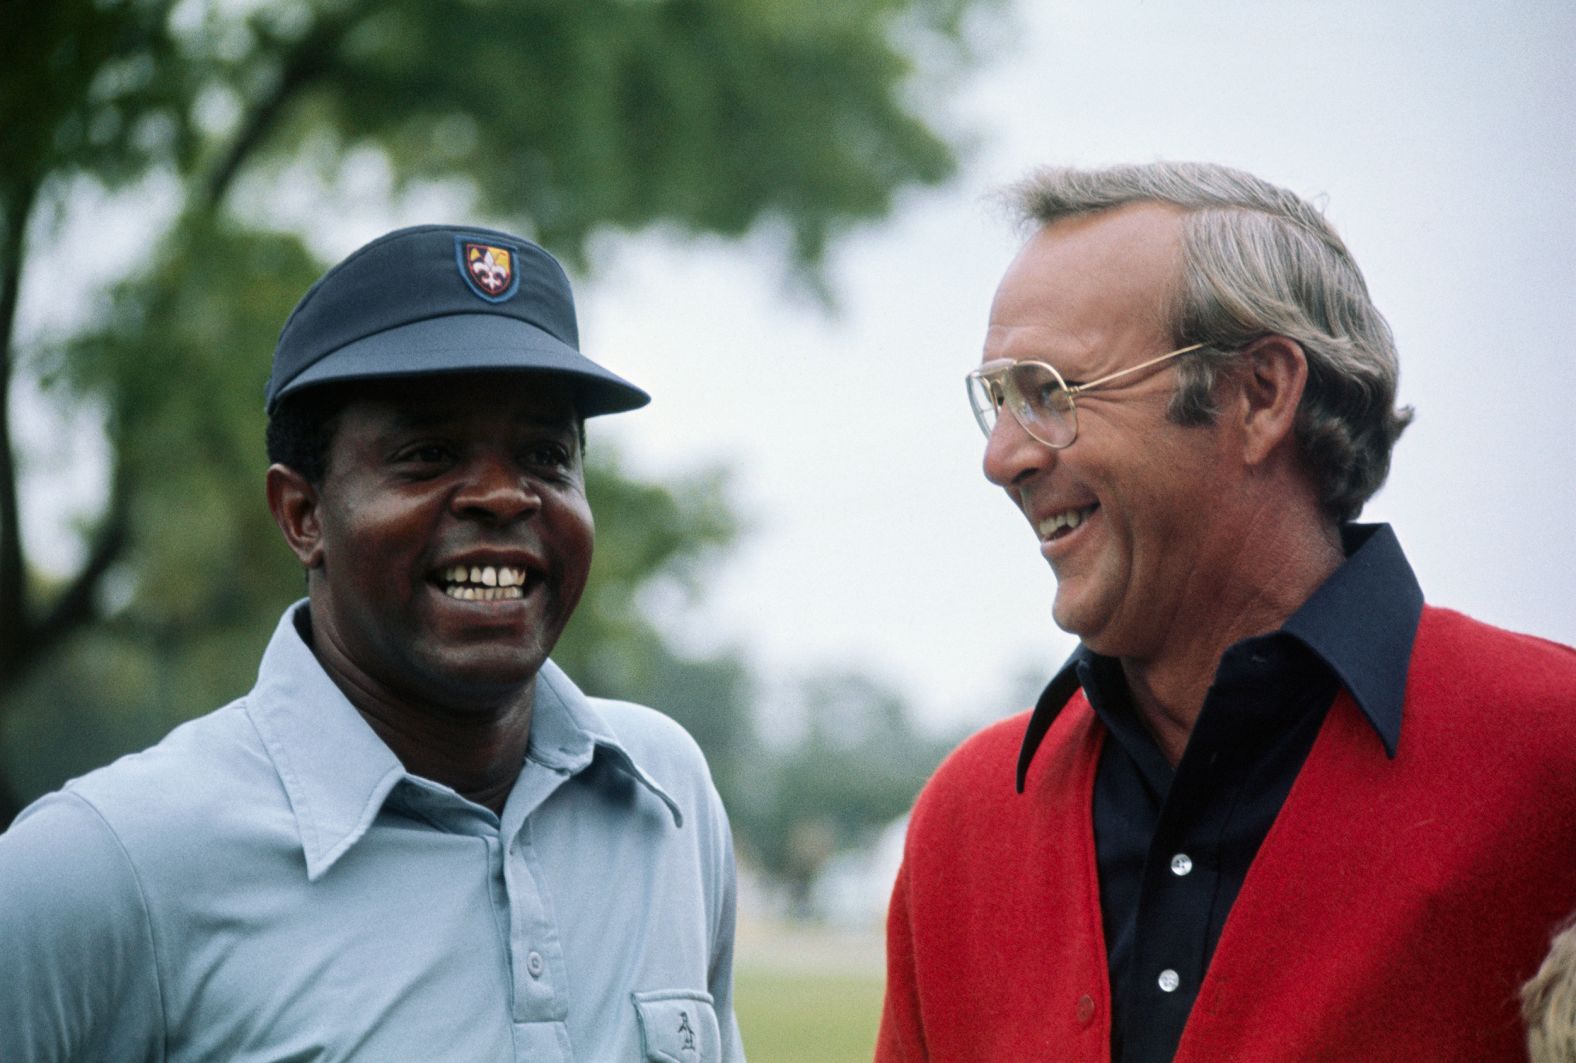 Elder shares a laugh with Arnold Palmer in 1975, a week before his Masters debut.